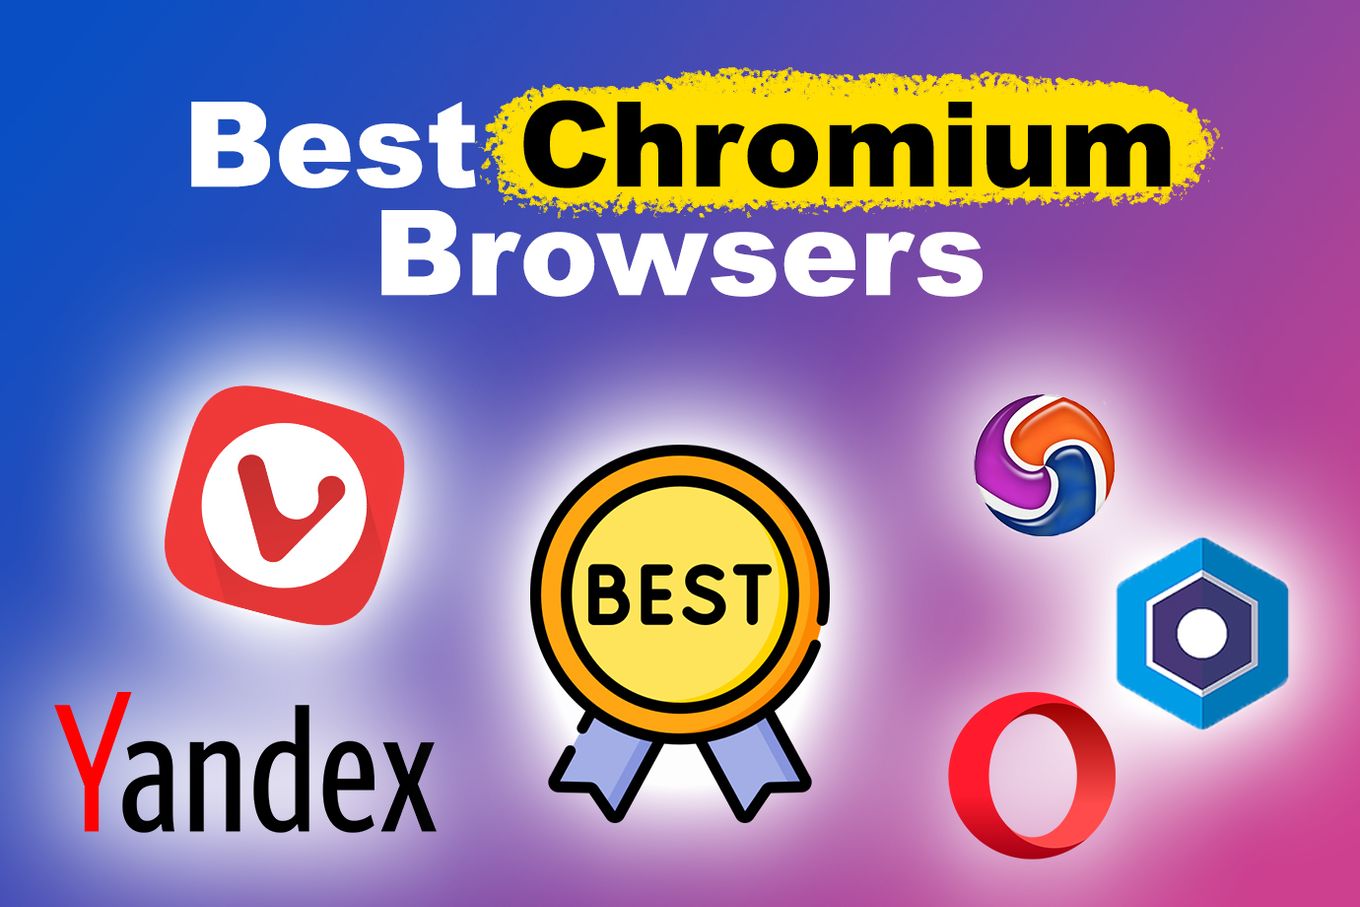 Best Chromium Browsers